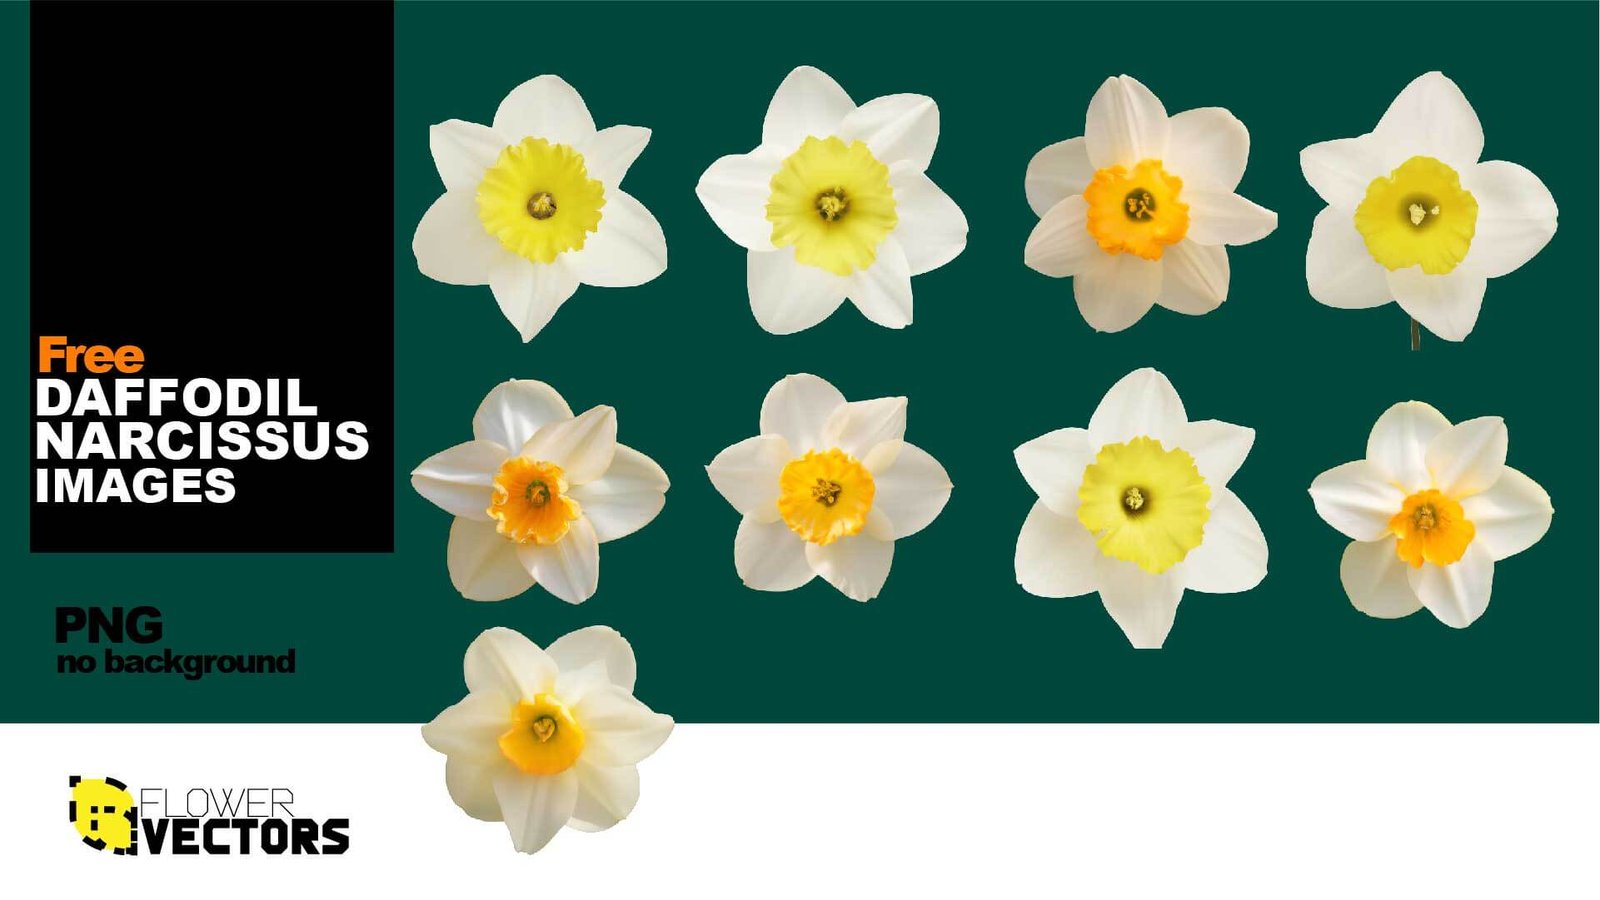 Daffodil flower narcissus images in PNG no background transparent